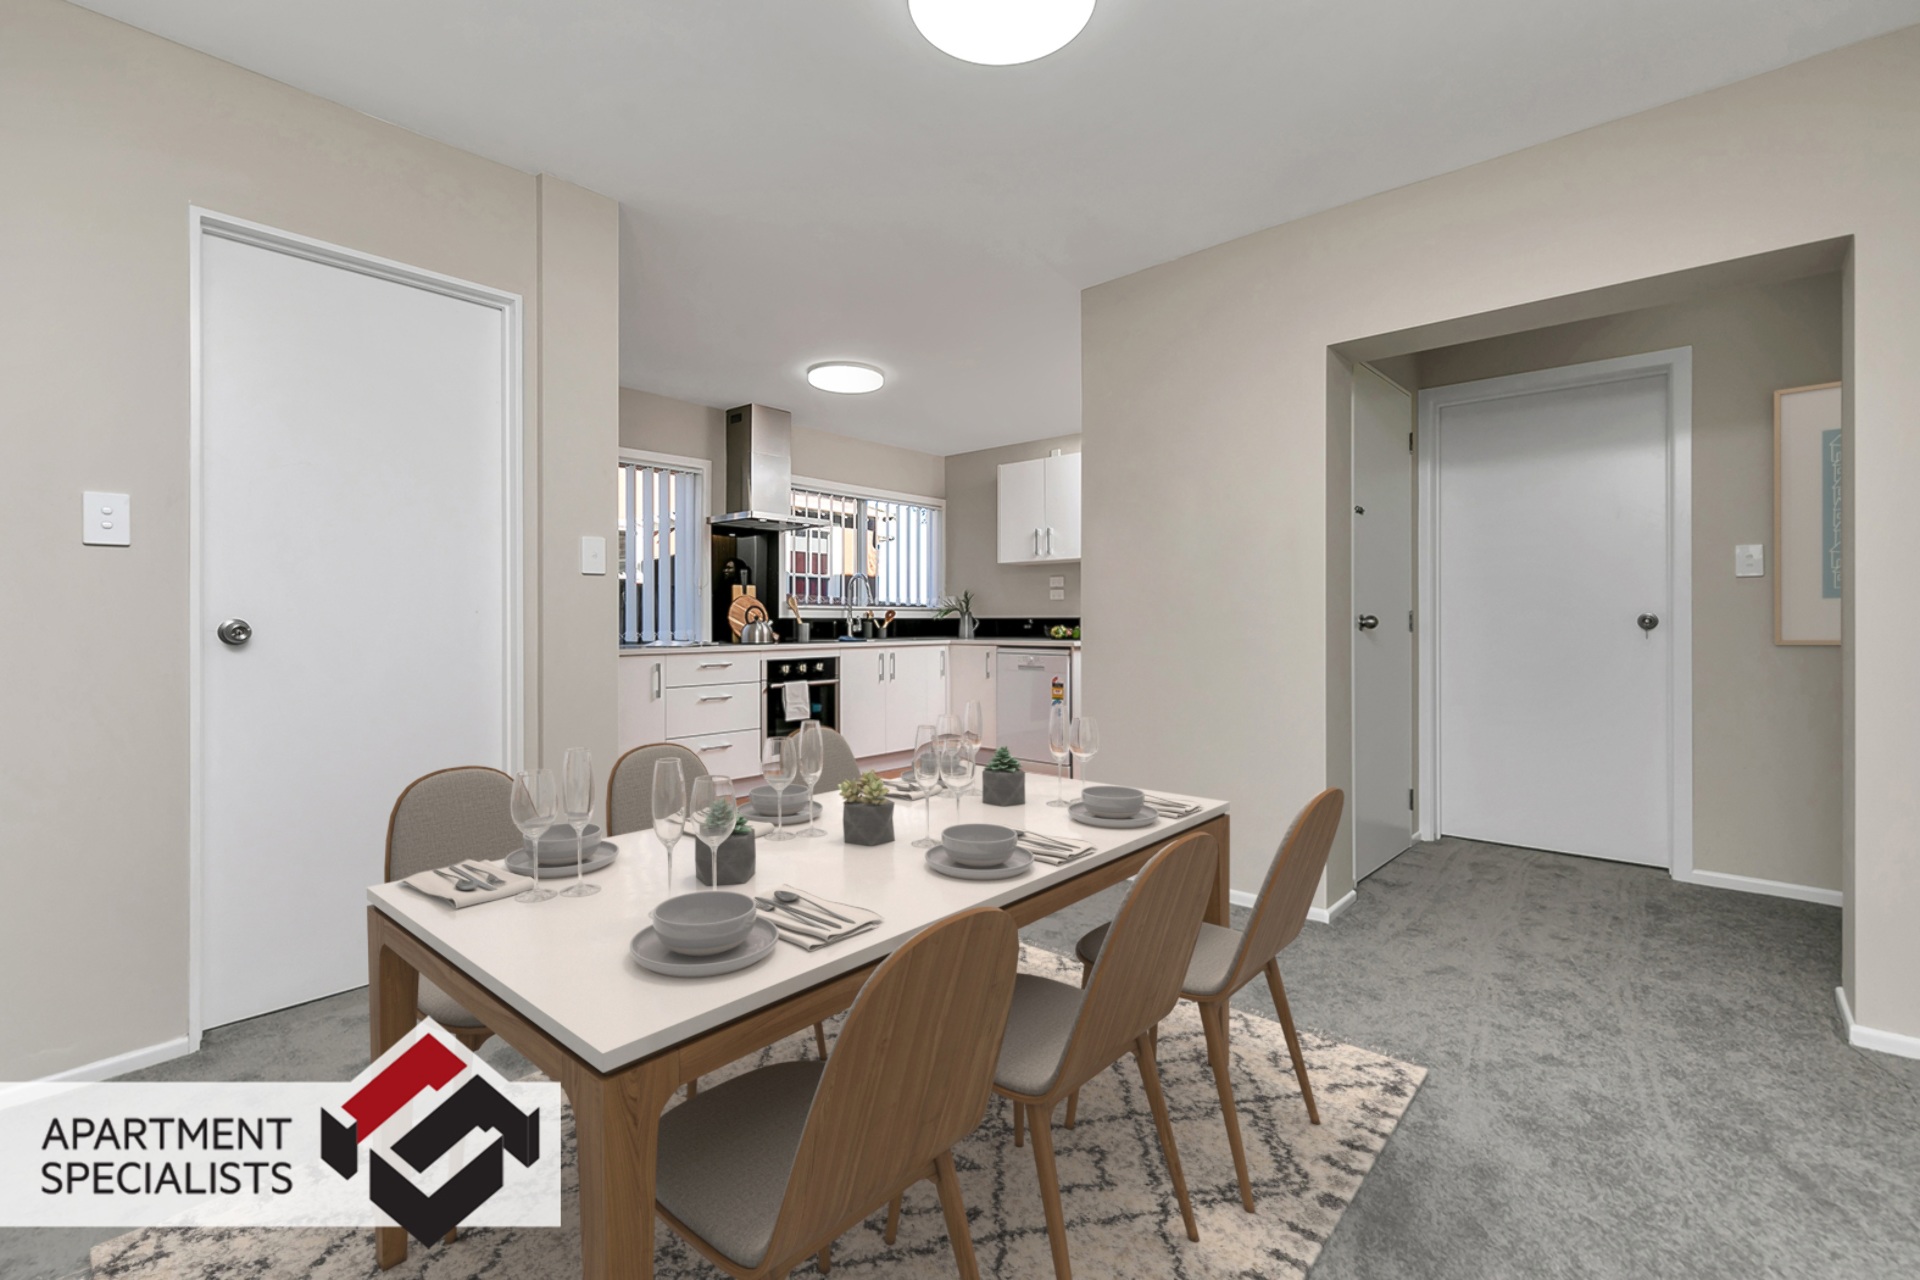 3 | 325 Mount Albert Road, Mount Roskill | Apartment Specialists